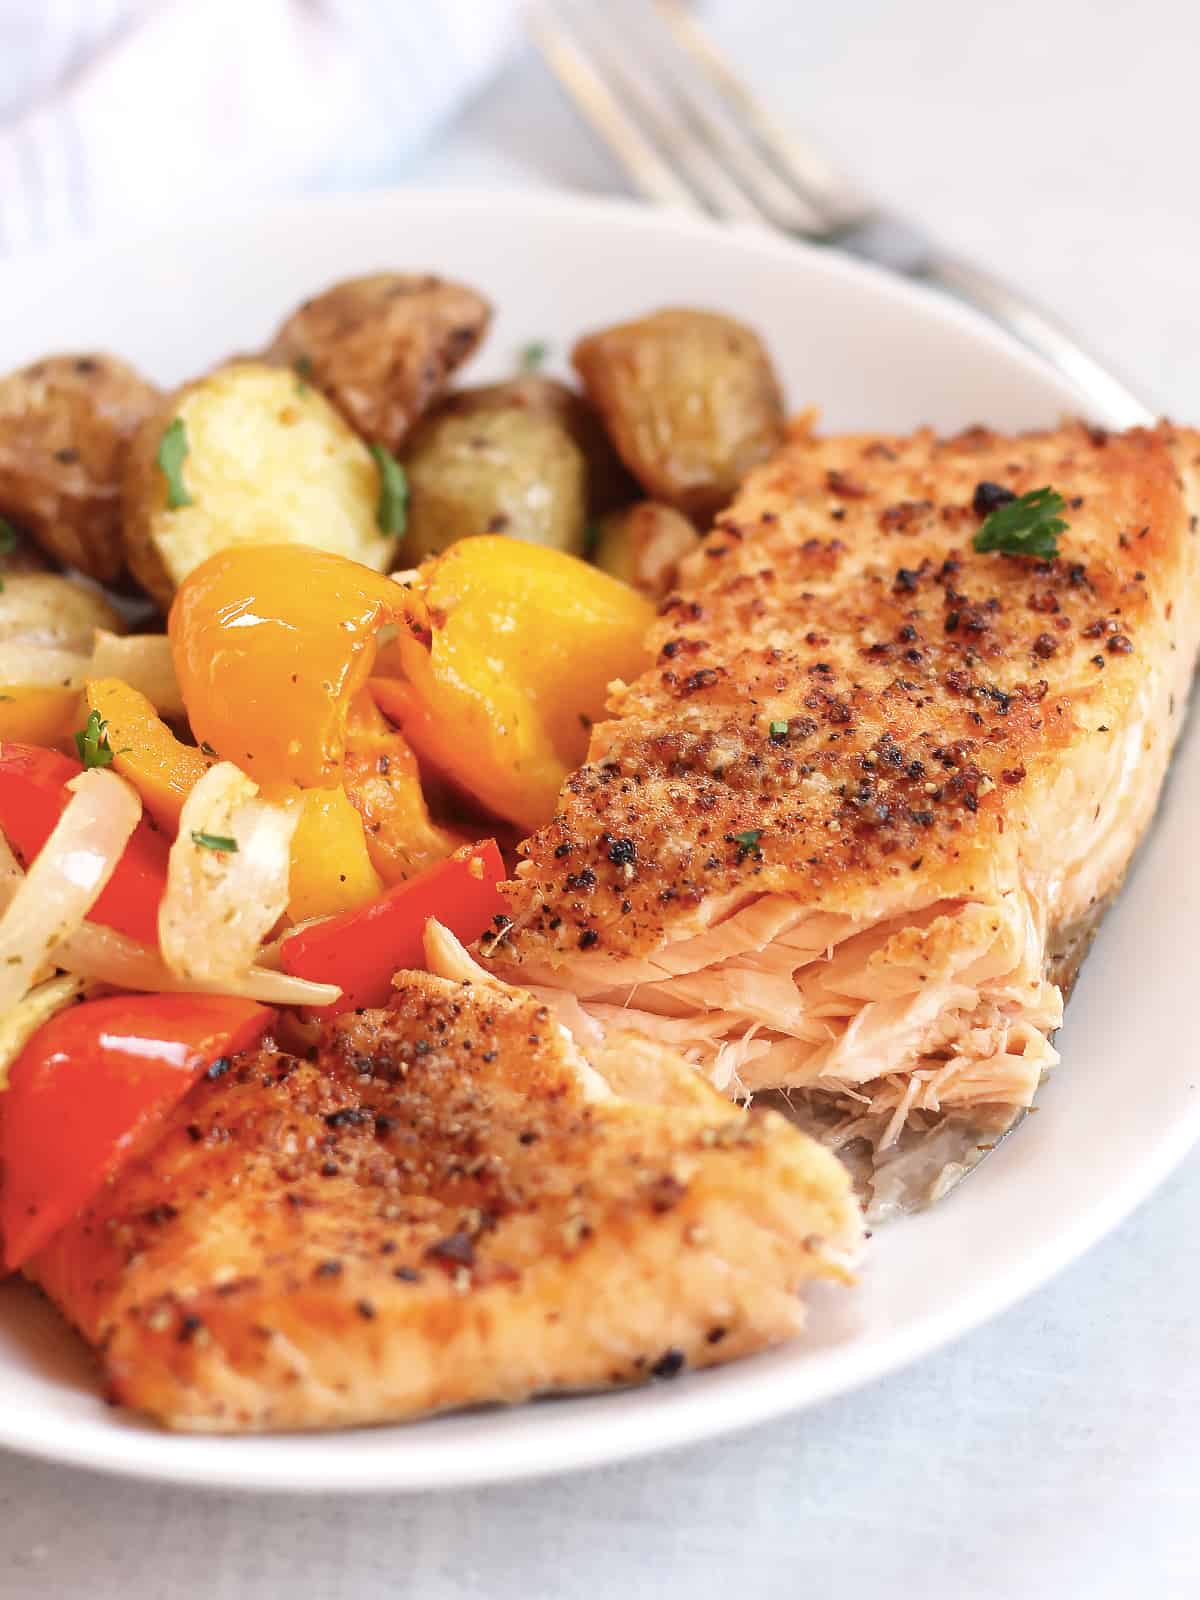 Seasoned salmon, vegetables and potatoes served on a plate.